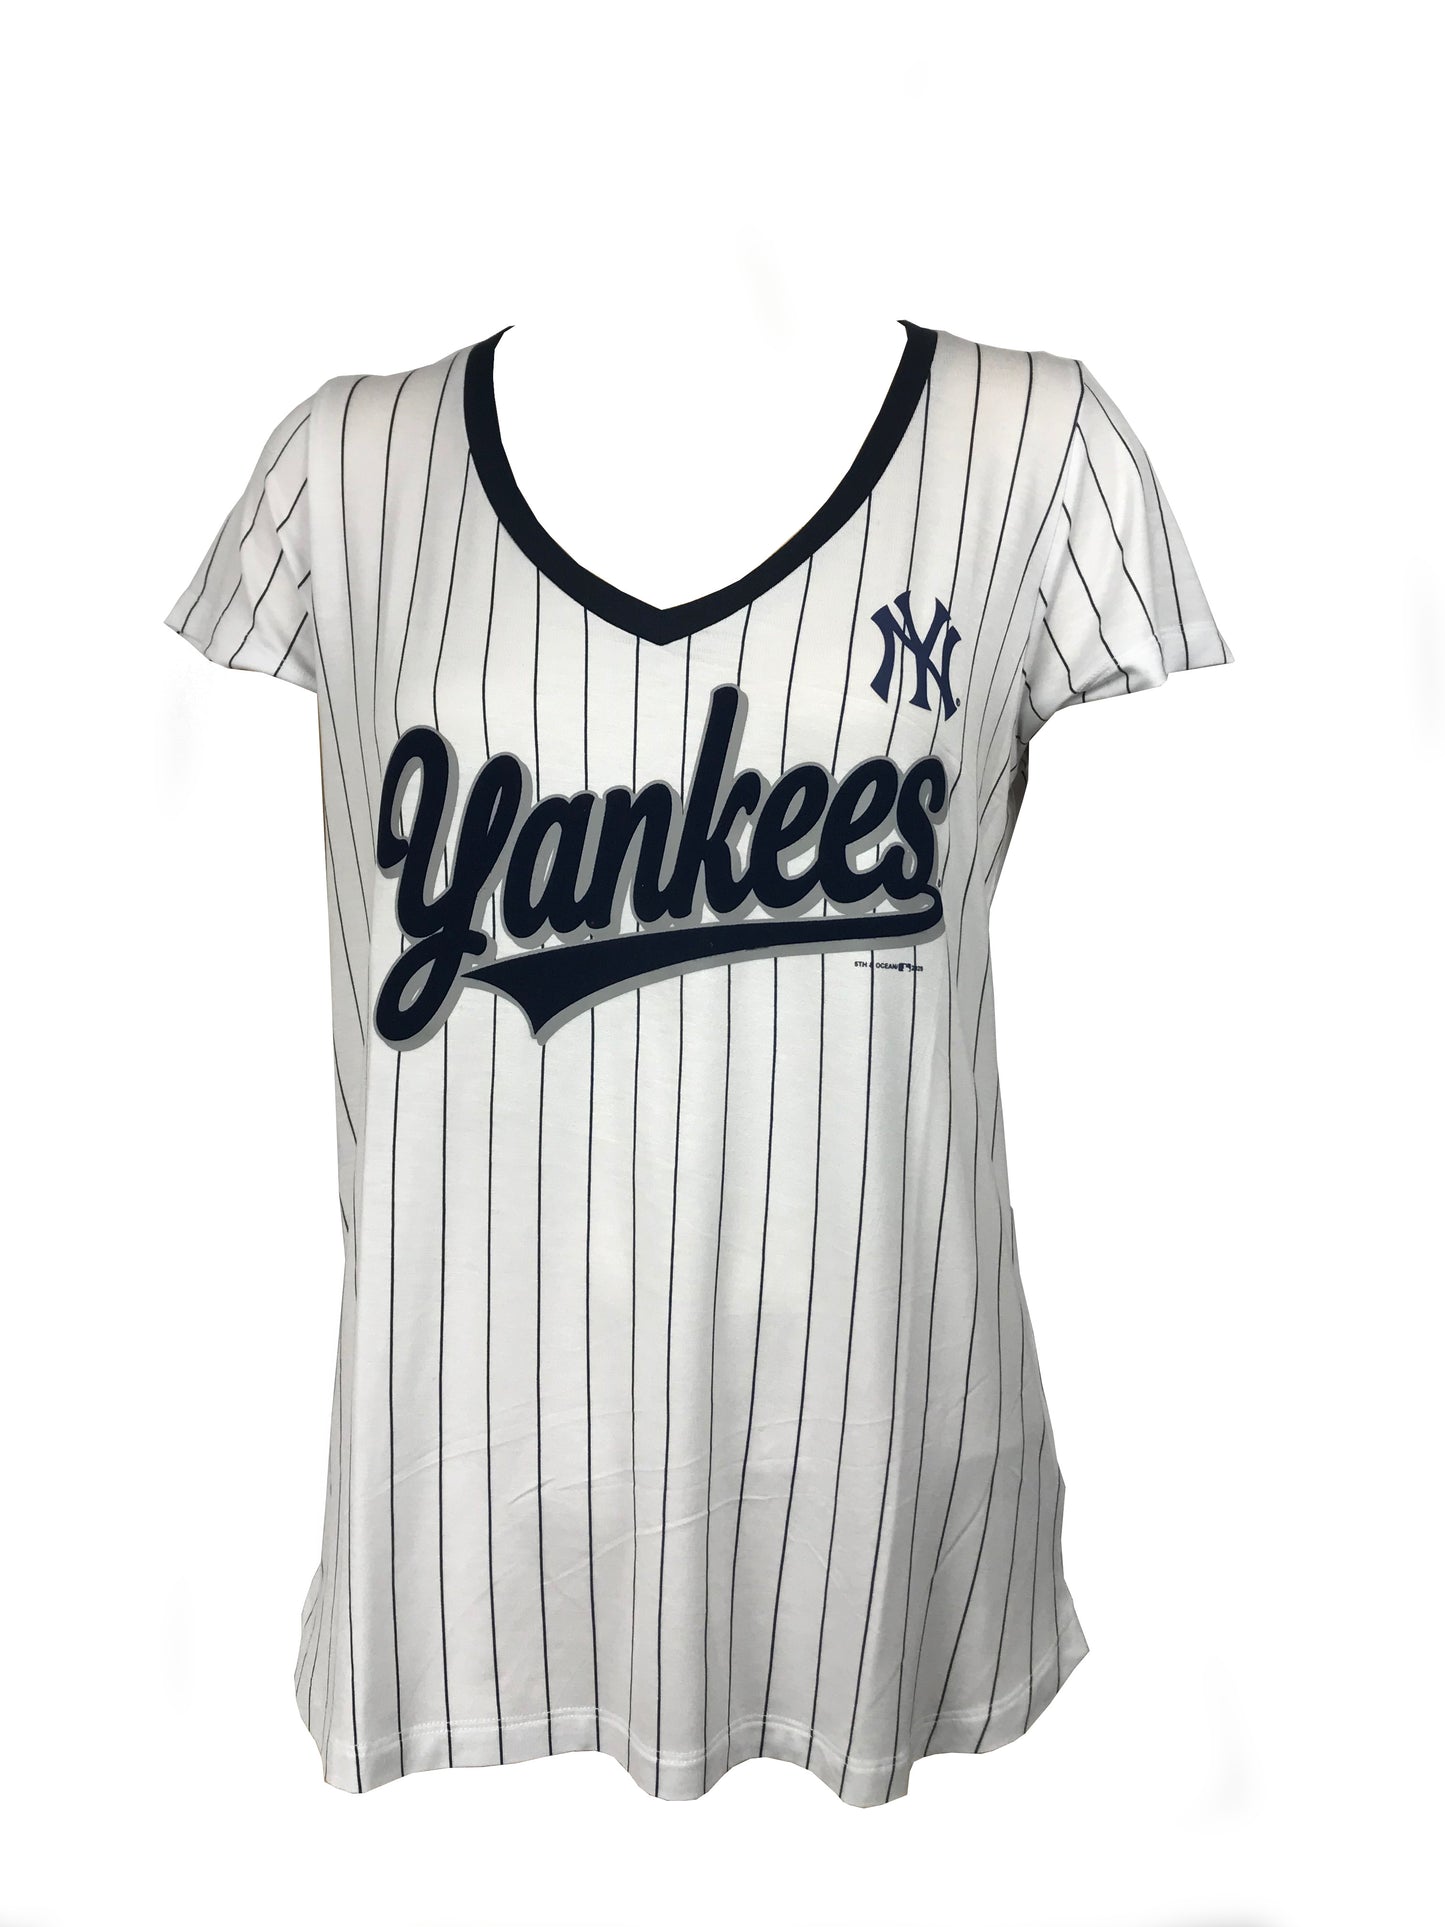 Official Ladies New York Yankees T-Shirts, Ladies Yankees Shirt, Yankees  Tees, Tank Tops